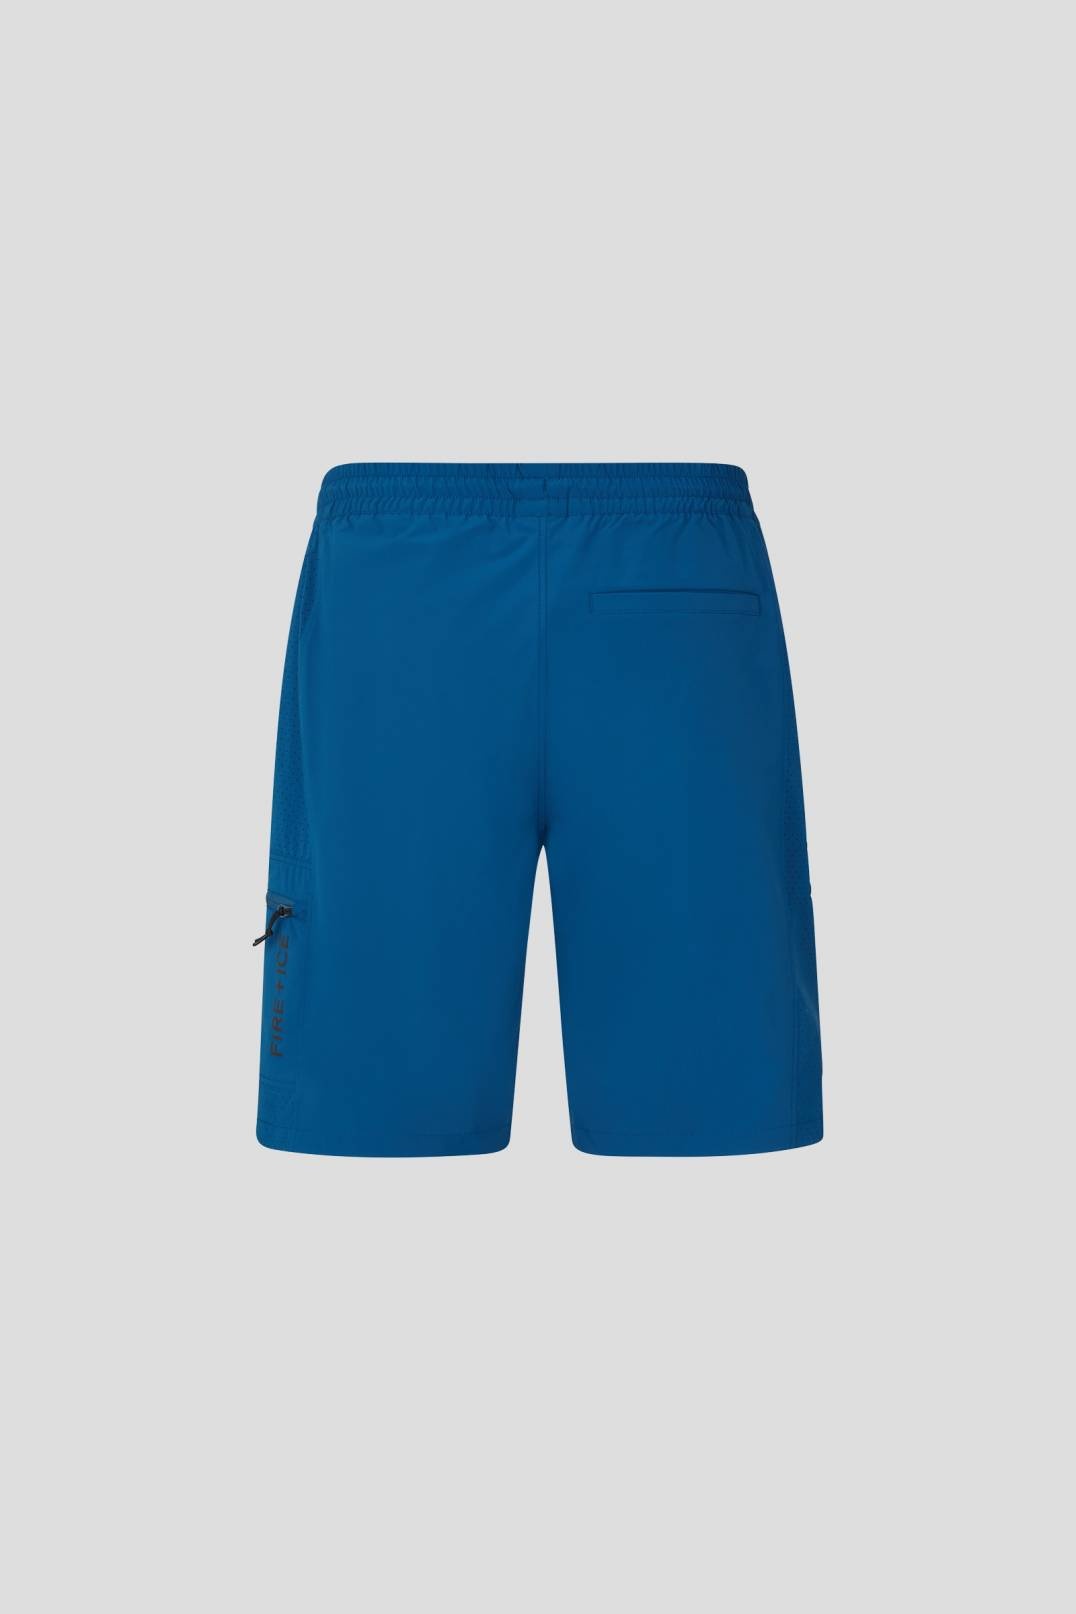 PAVEL FUNCTIONAL SHORTS IN ICE BLUE - 2